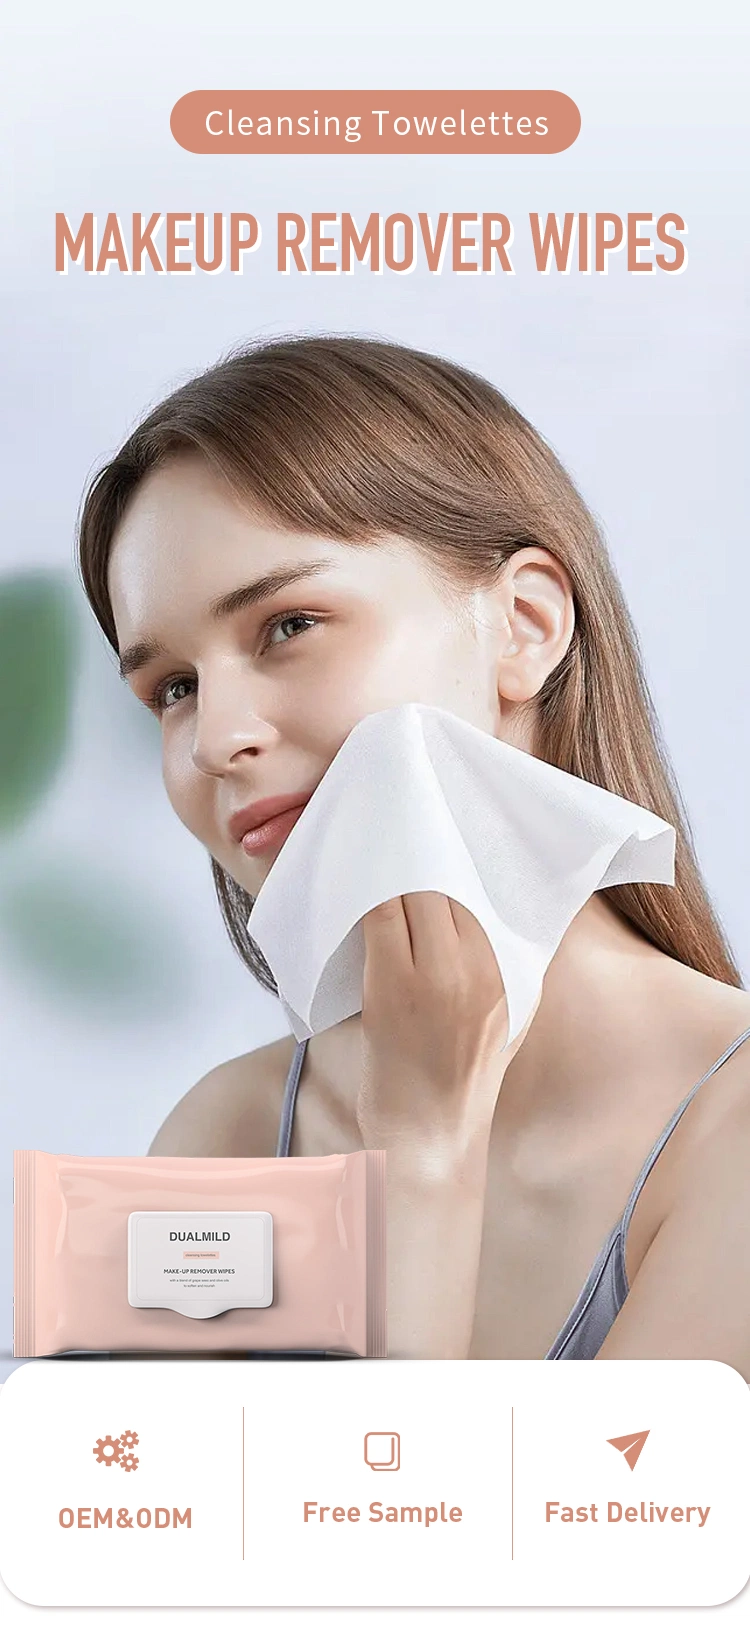 OEM Facial Best Makeup Remover Wipes Clean Towels Biodegradable Face Towel with Cotton Extract for Sensitive Skin